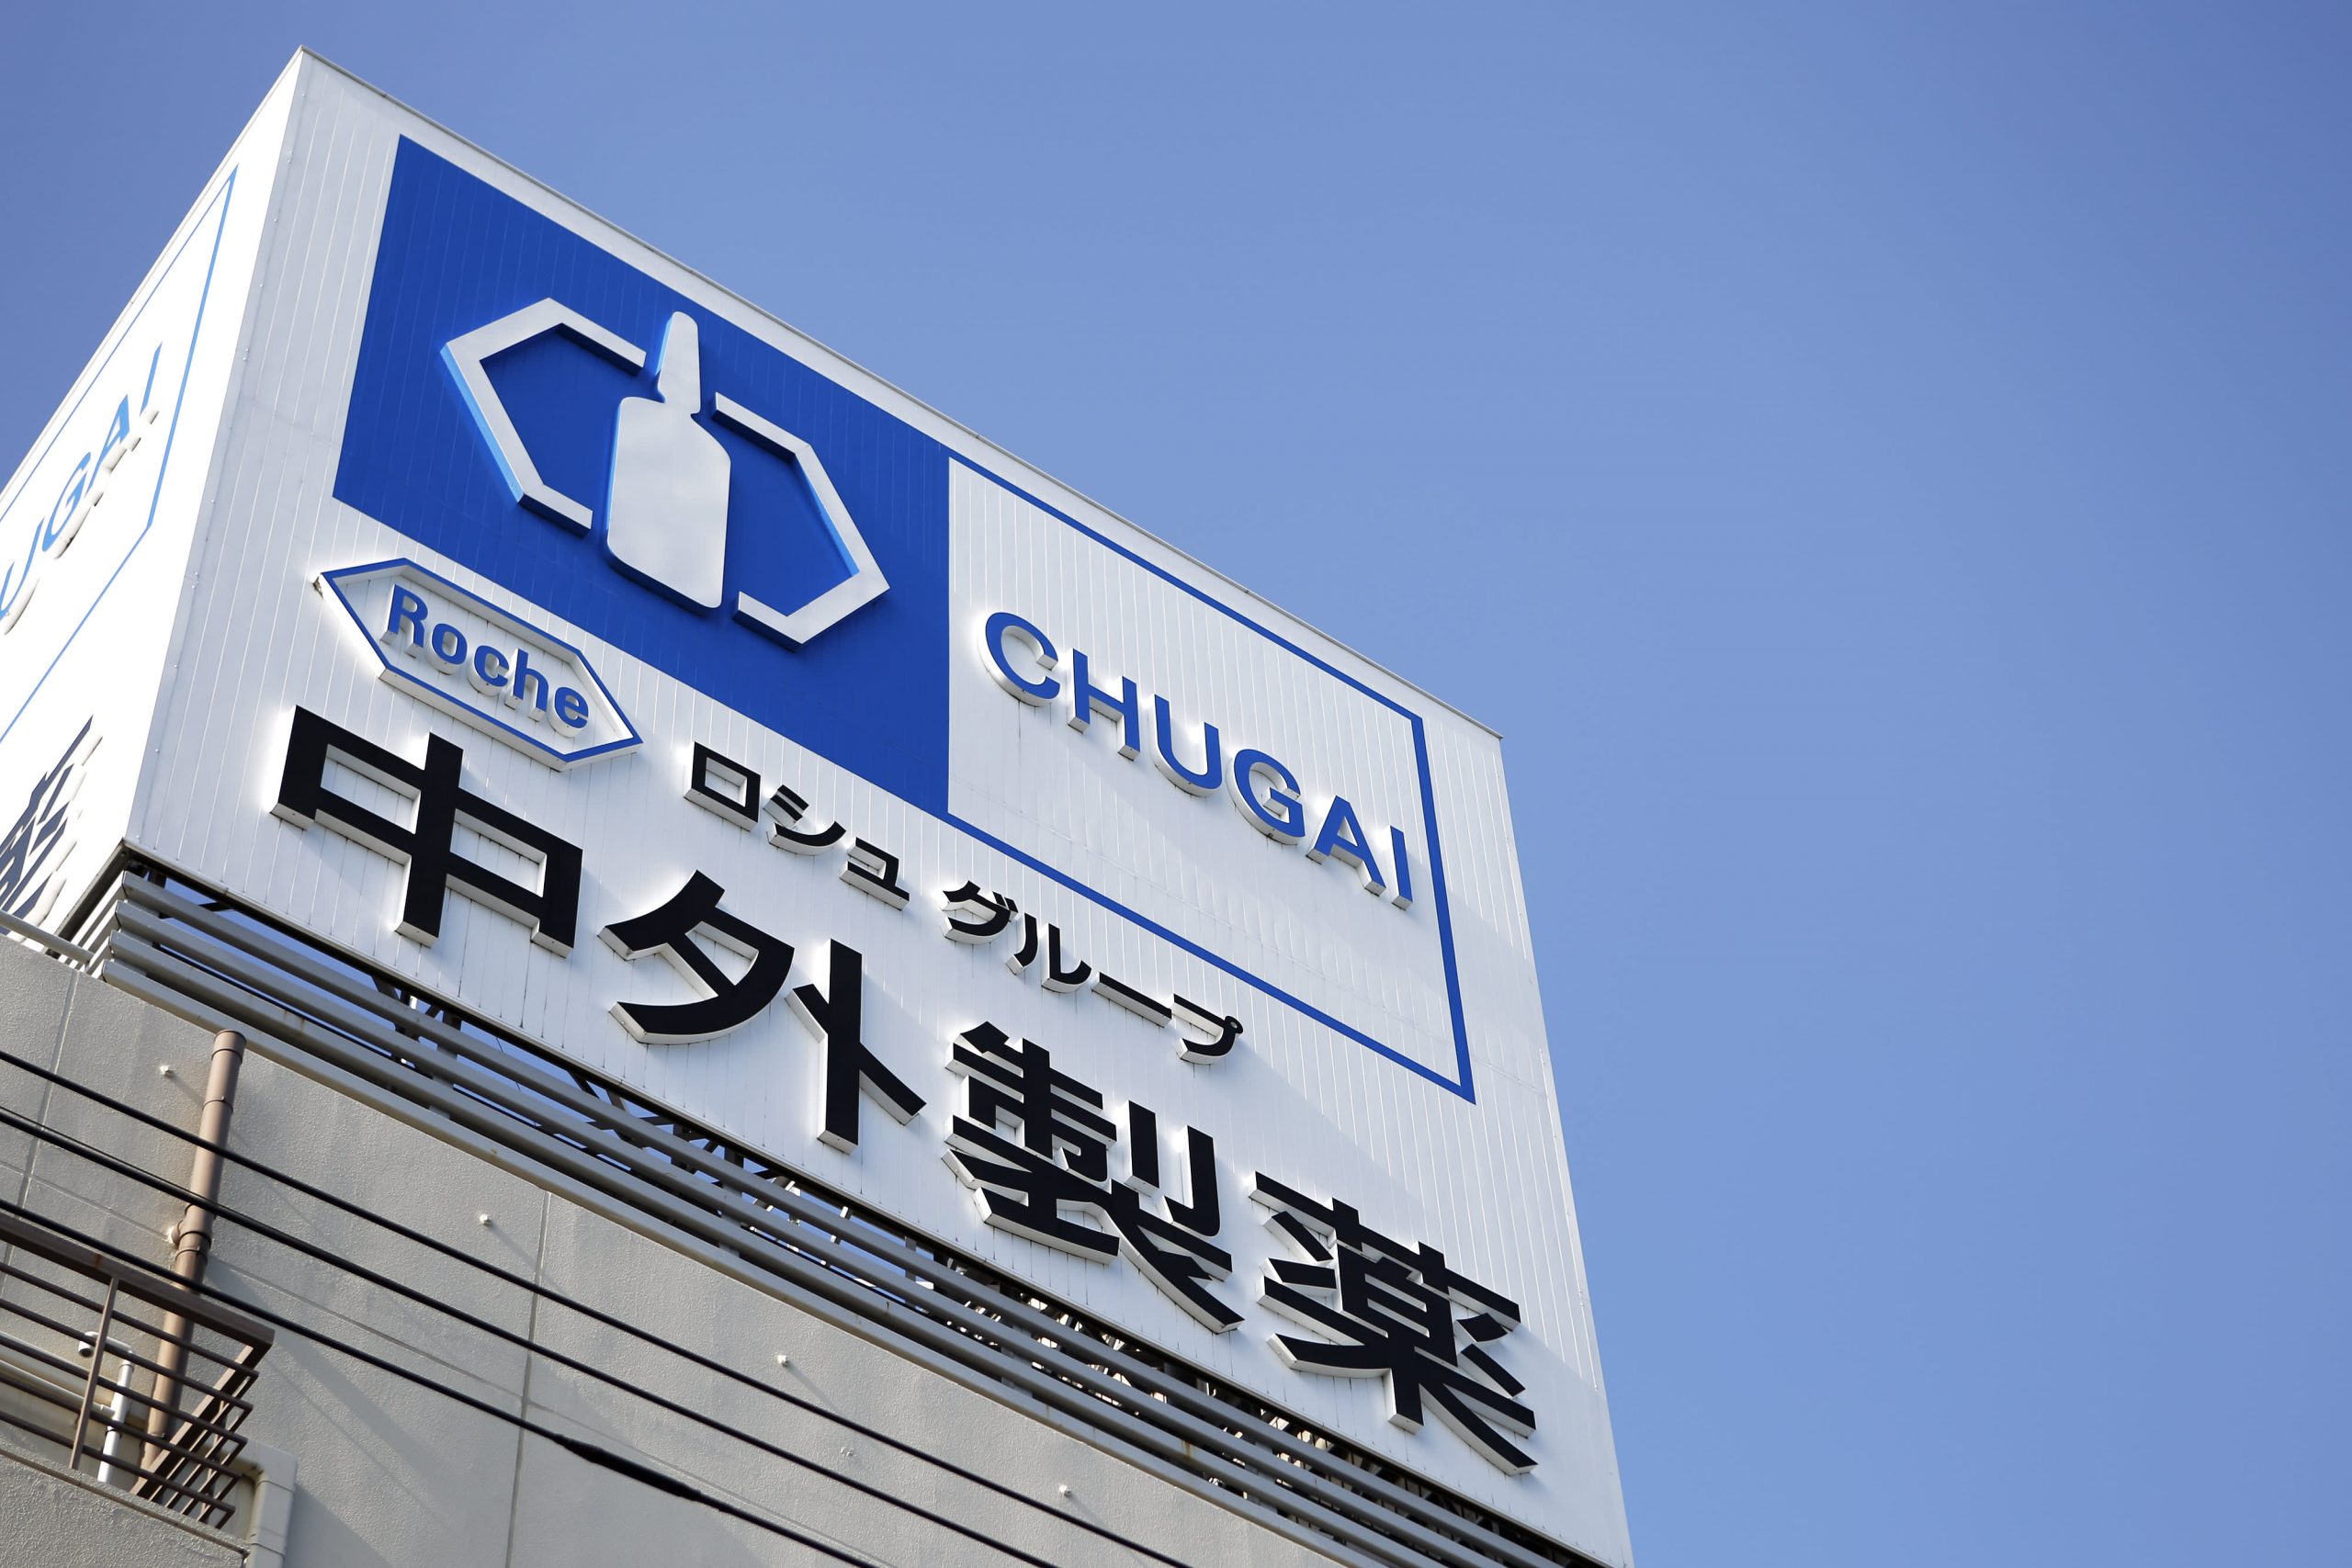 Chugai soars after UK says drug reduces hospital time for Covid sufferers